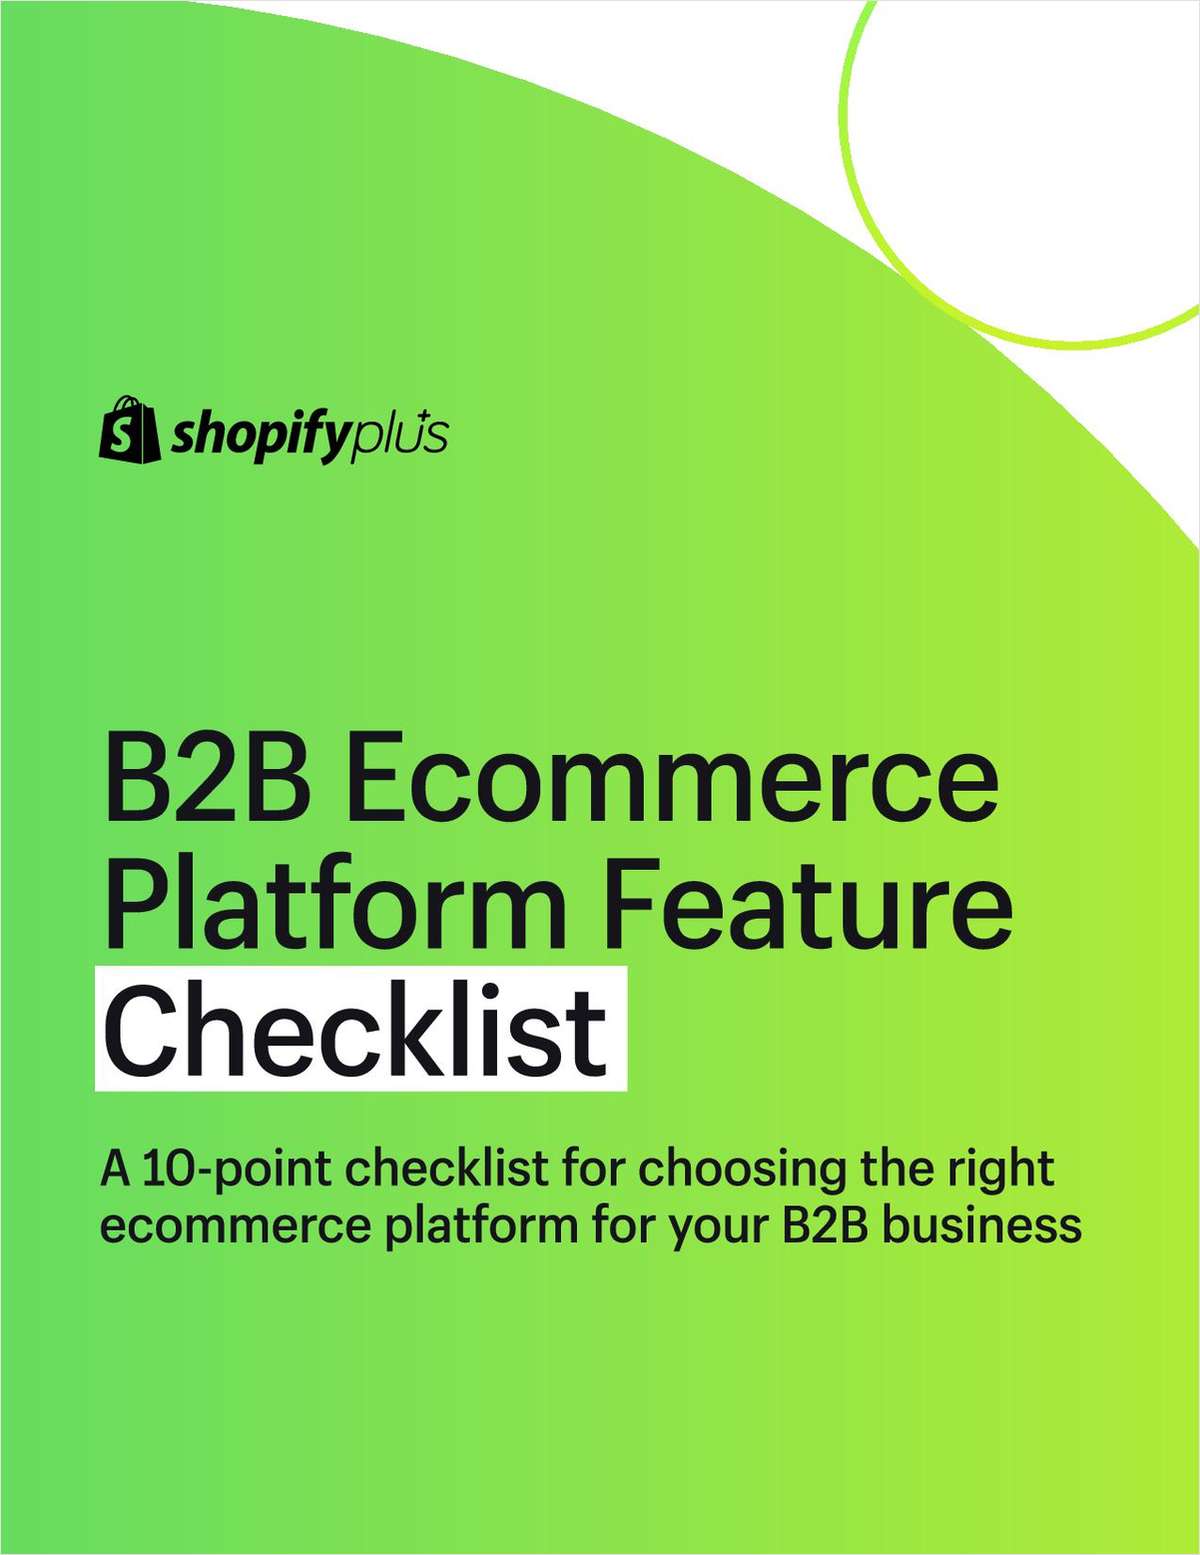 Unlock Substantial Growth Through Flexible and Convenient B2B Ecommerce